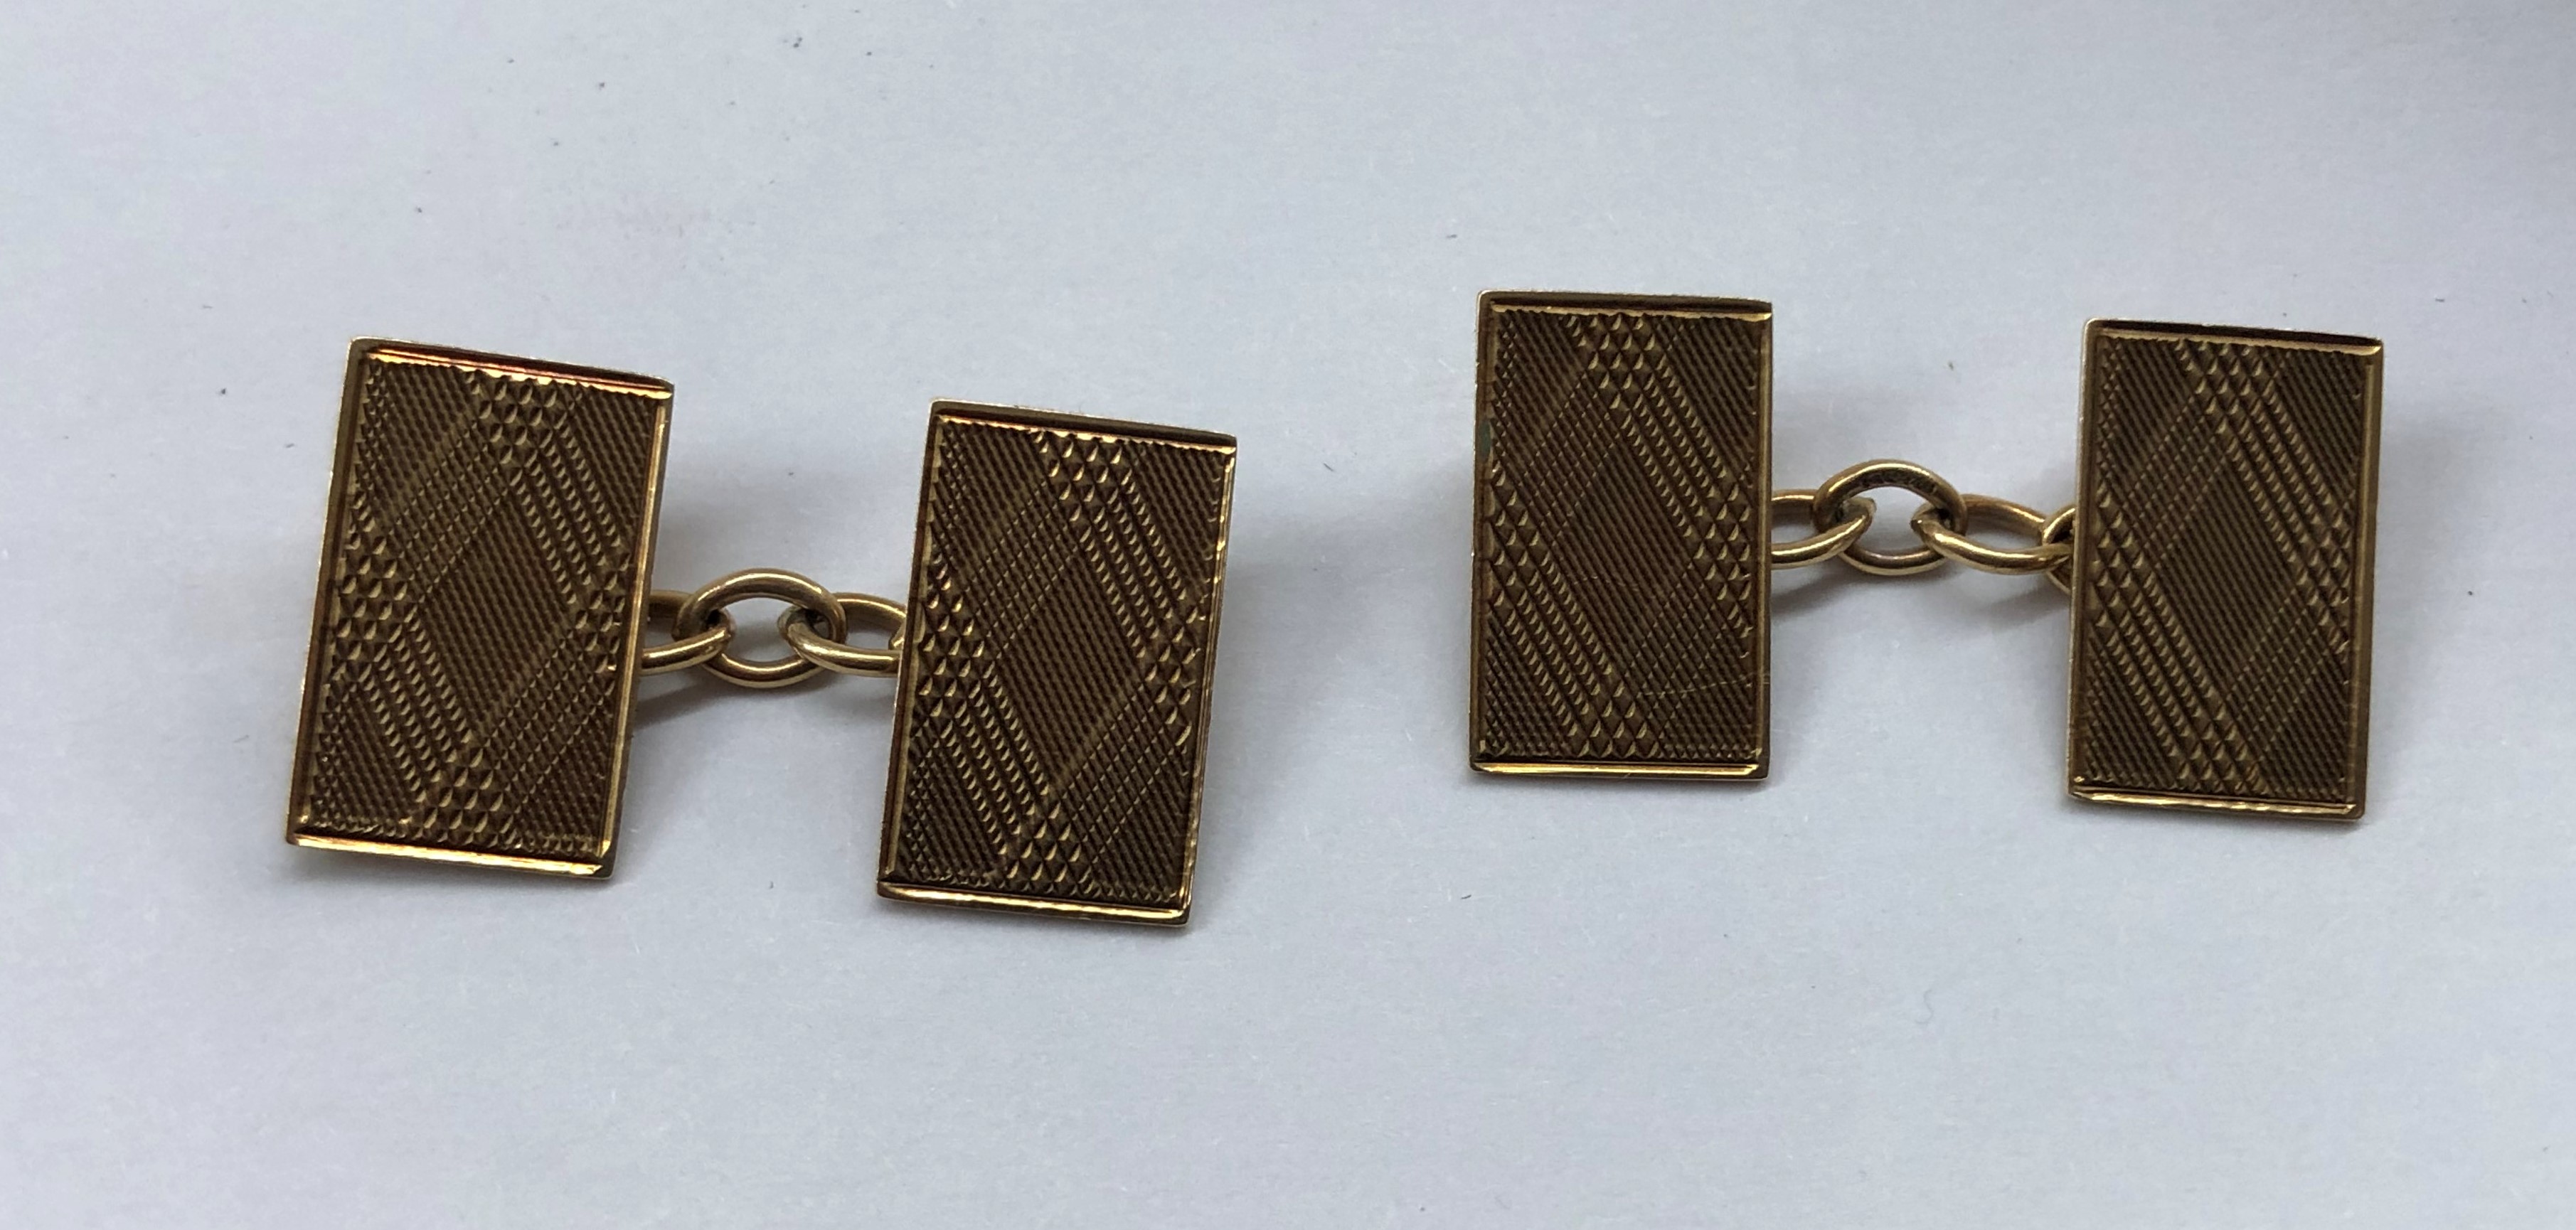 CASED PAIR OF RECTANGULAR CUFFLINKS WITH ENGINE TURNED DECORATION 4.6G APPROX.